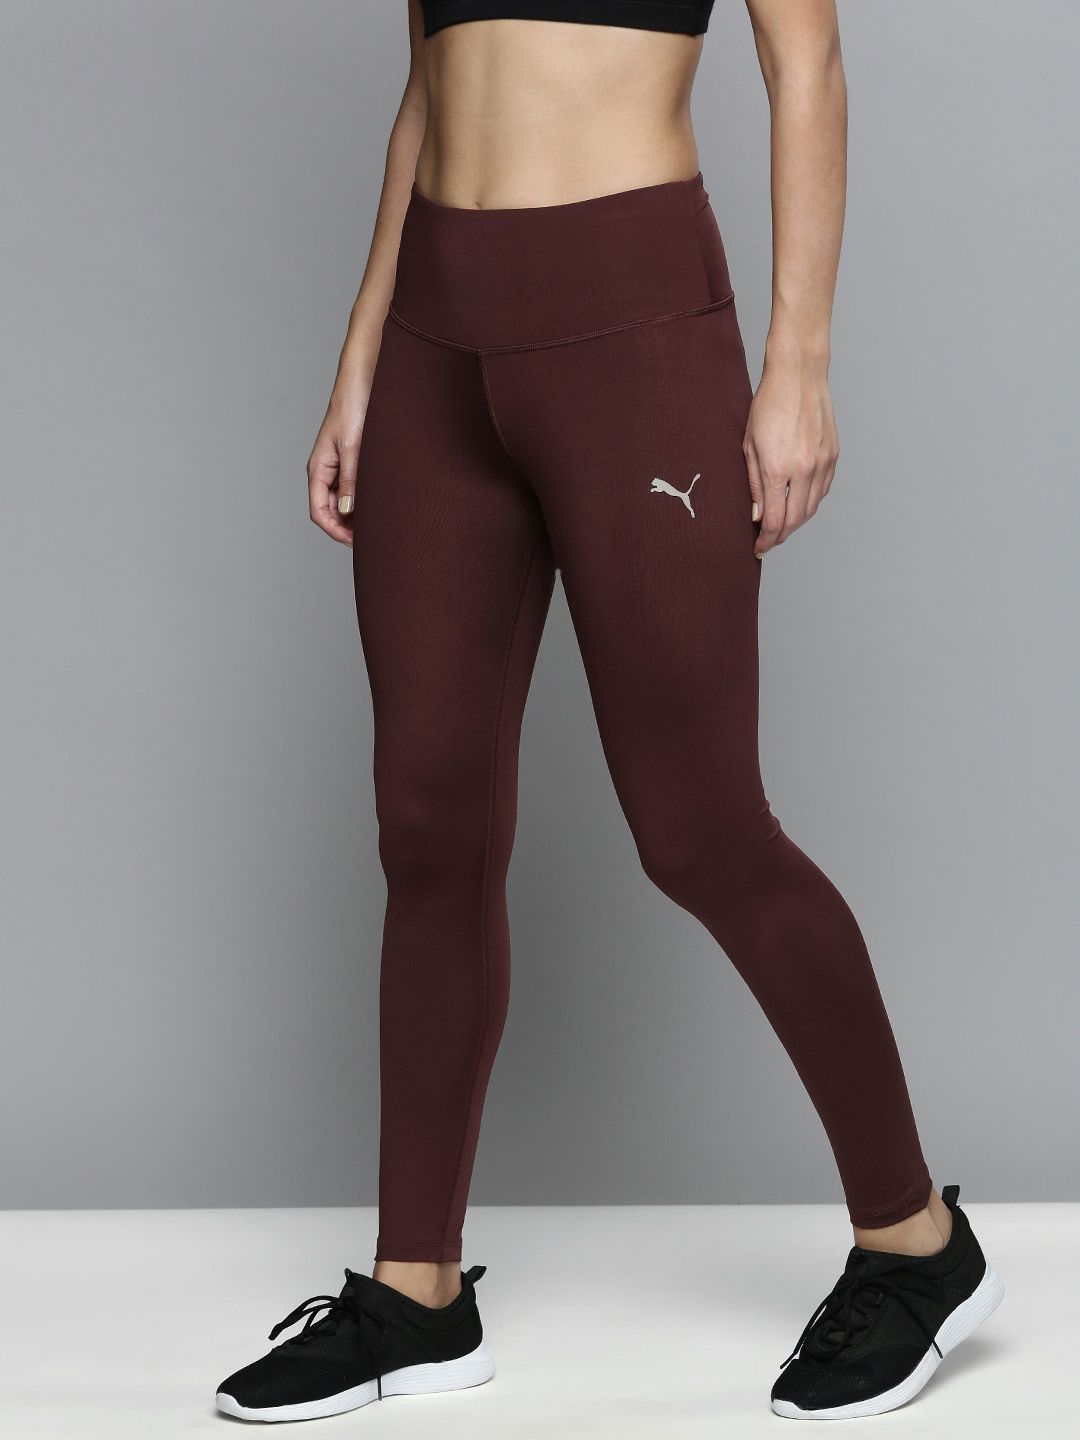 Puma Women Brown Solid ESS Tights Price in India